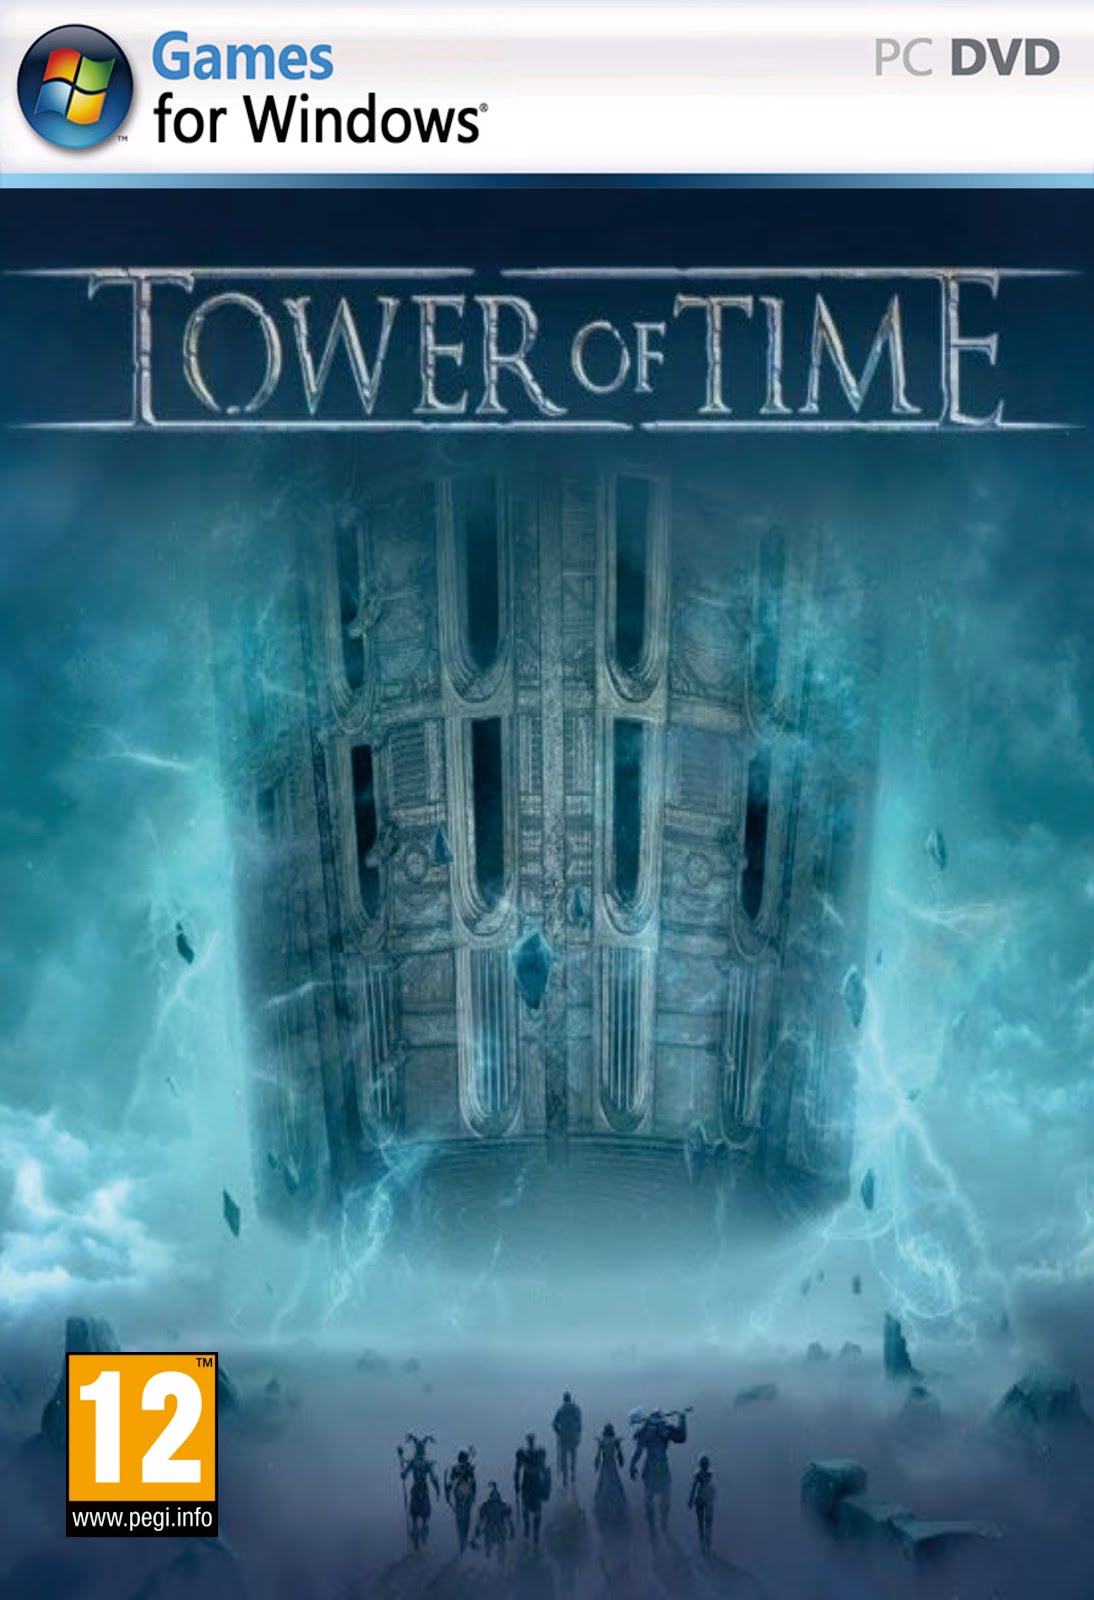 Steam tower of time фото 98